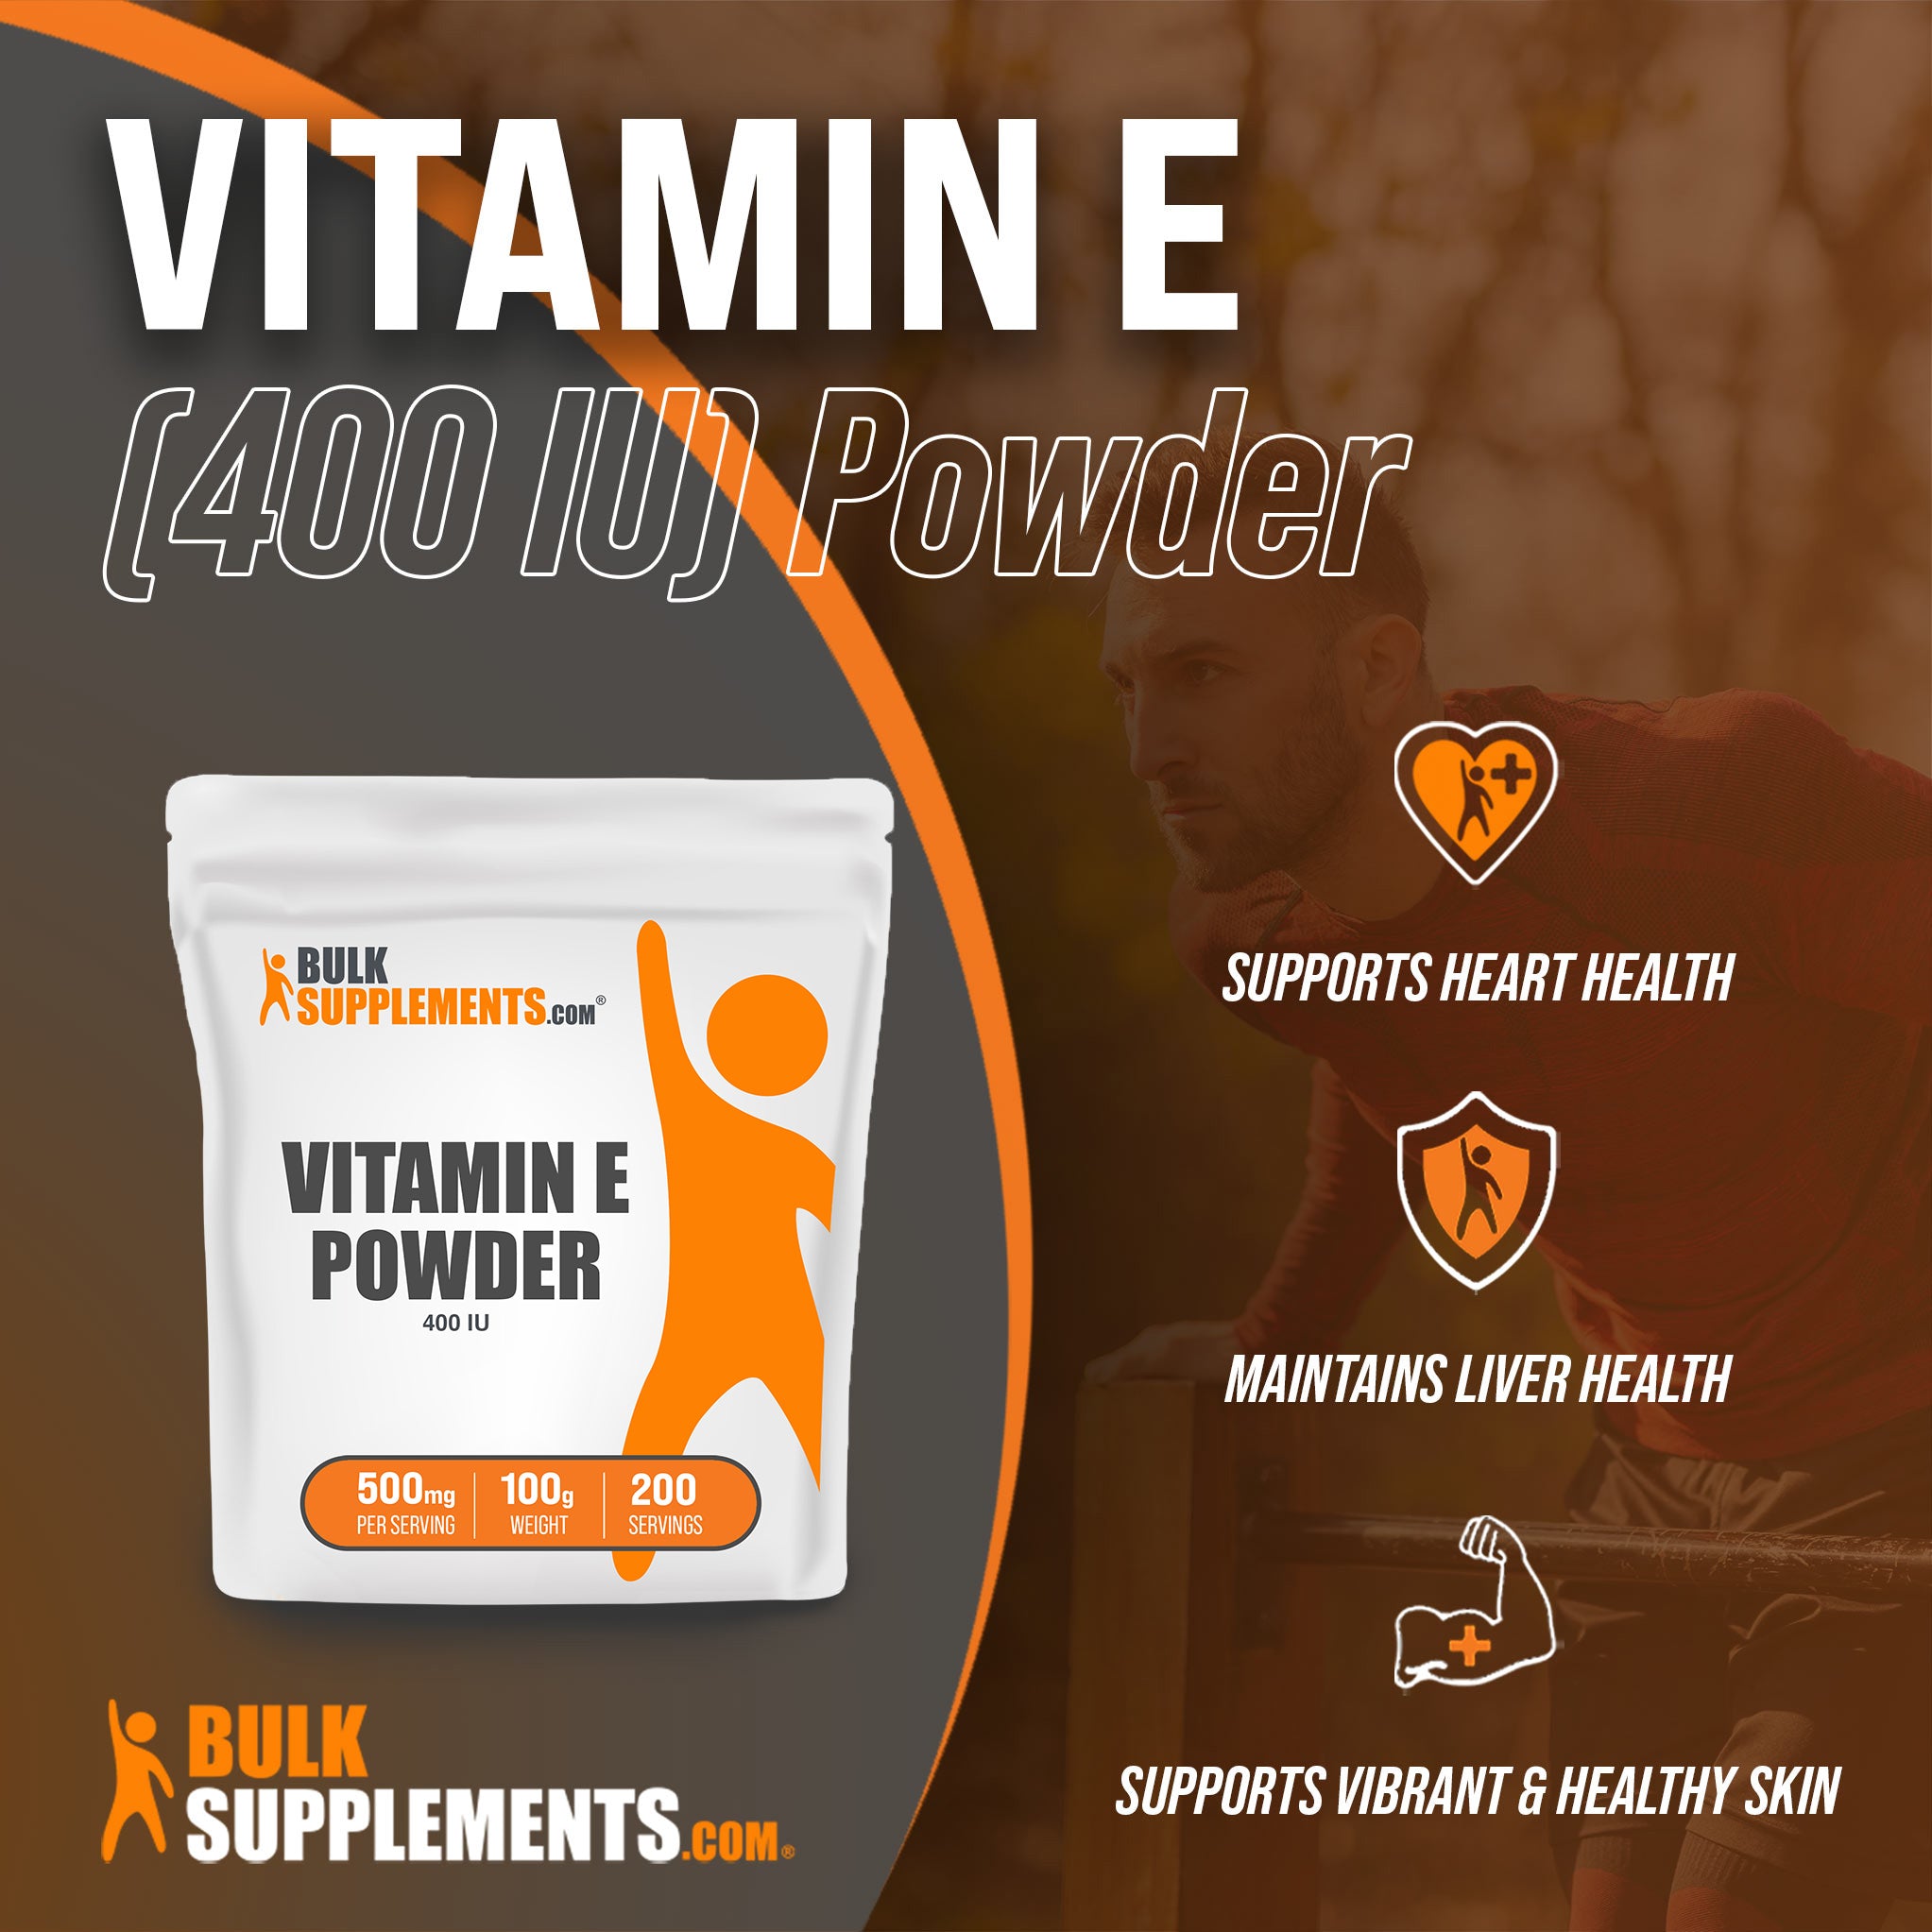 Benefits of Vitamin E Powder: supports heart health, maintains liver health, supports vibrant and healthy skin